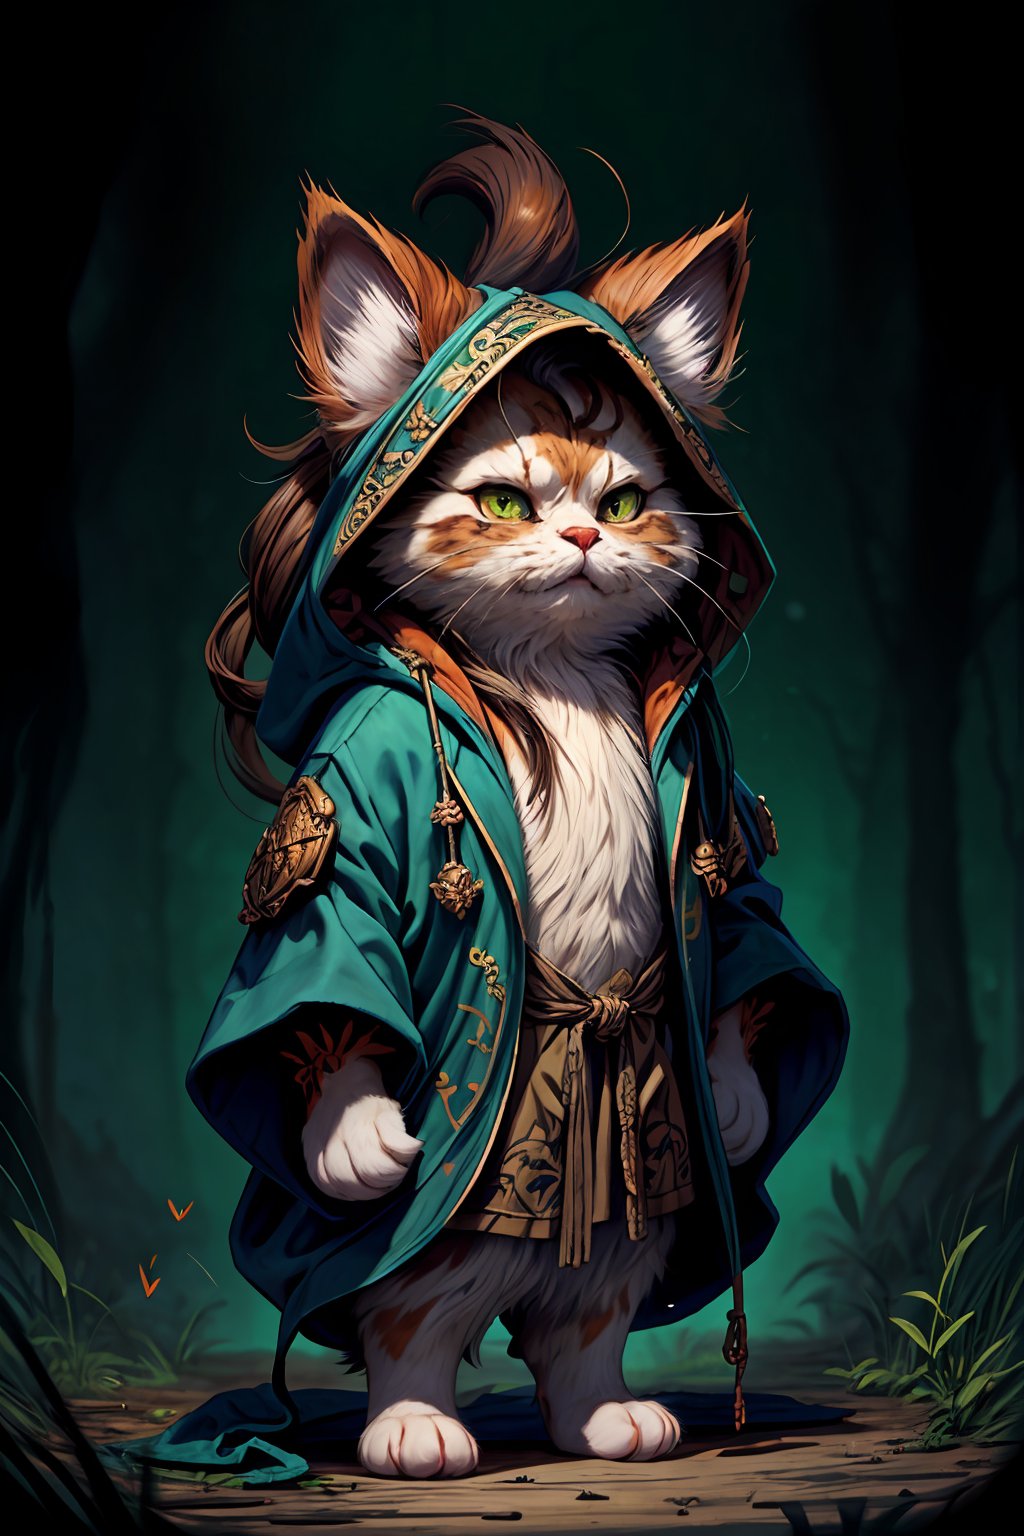 Hyper-detailed painting, Jean-Baptiste Monge style, persian cat Anthropomorphic, mage, ,, , (extremely intricate robes, magical robes orange and green  ),, ,, , highest quality,, very angry face, body fitness, full body, long hair with braids, at night in the forest with fireflies,